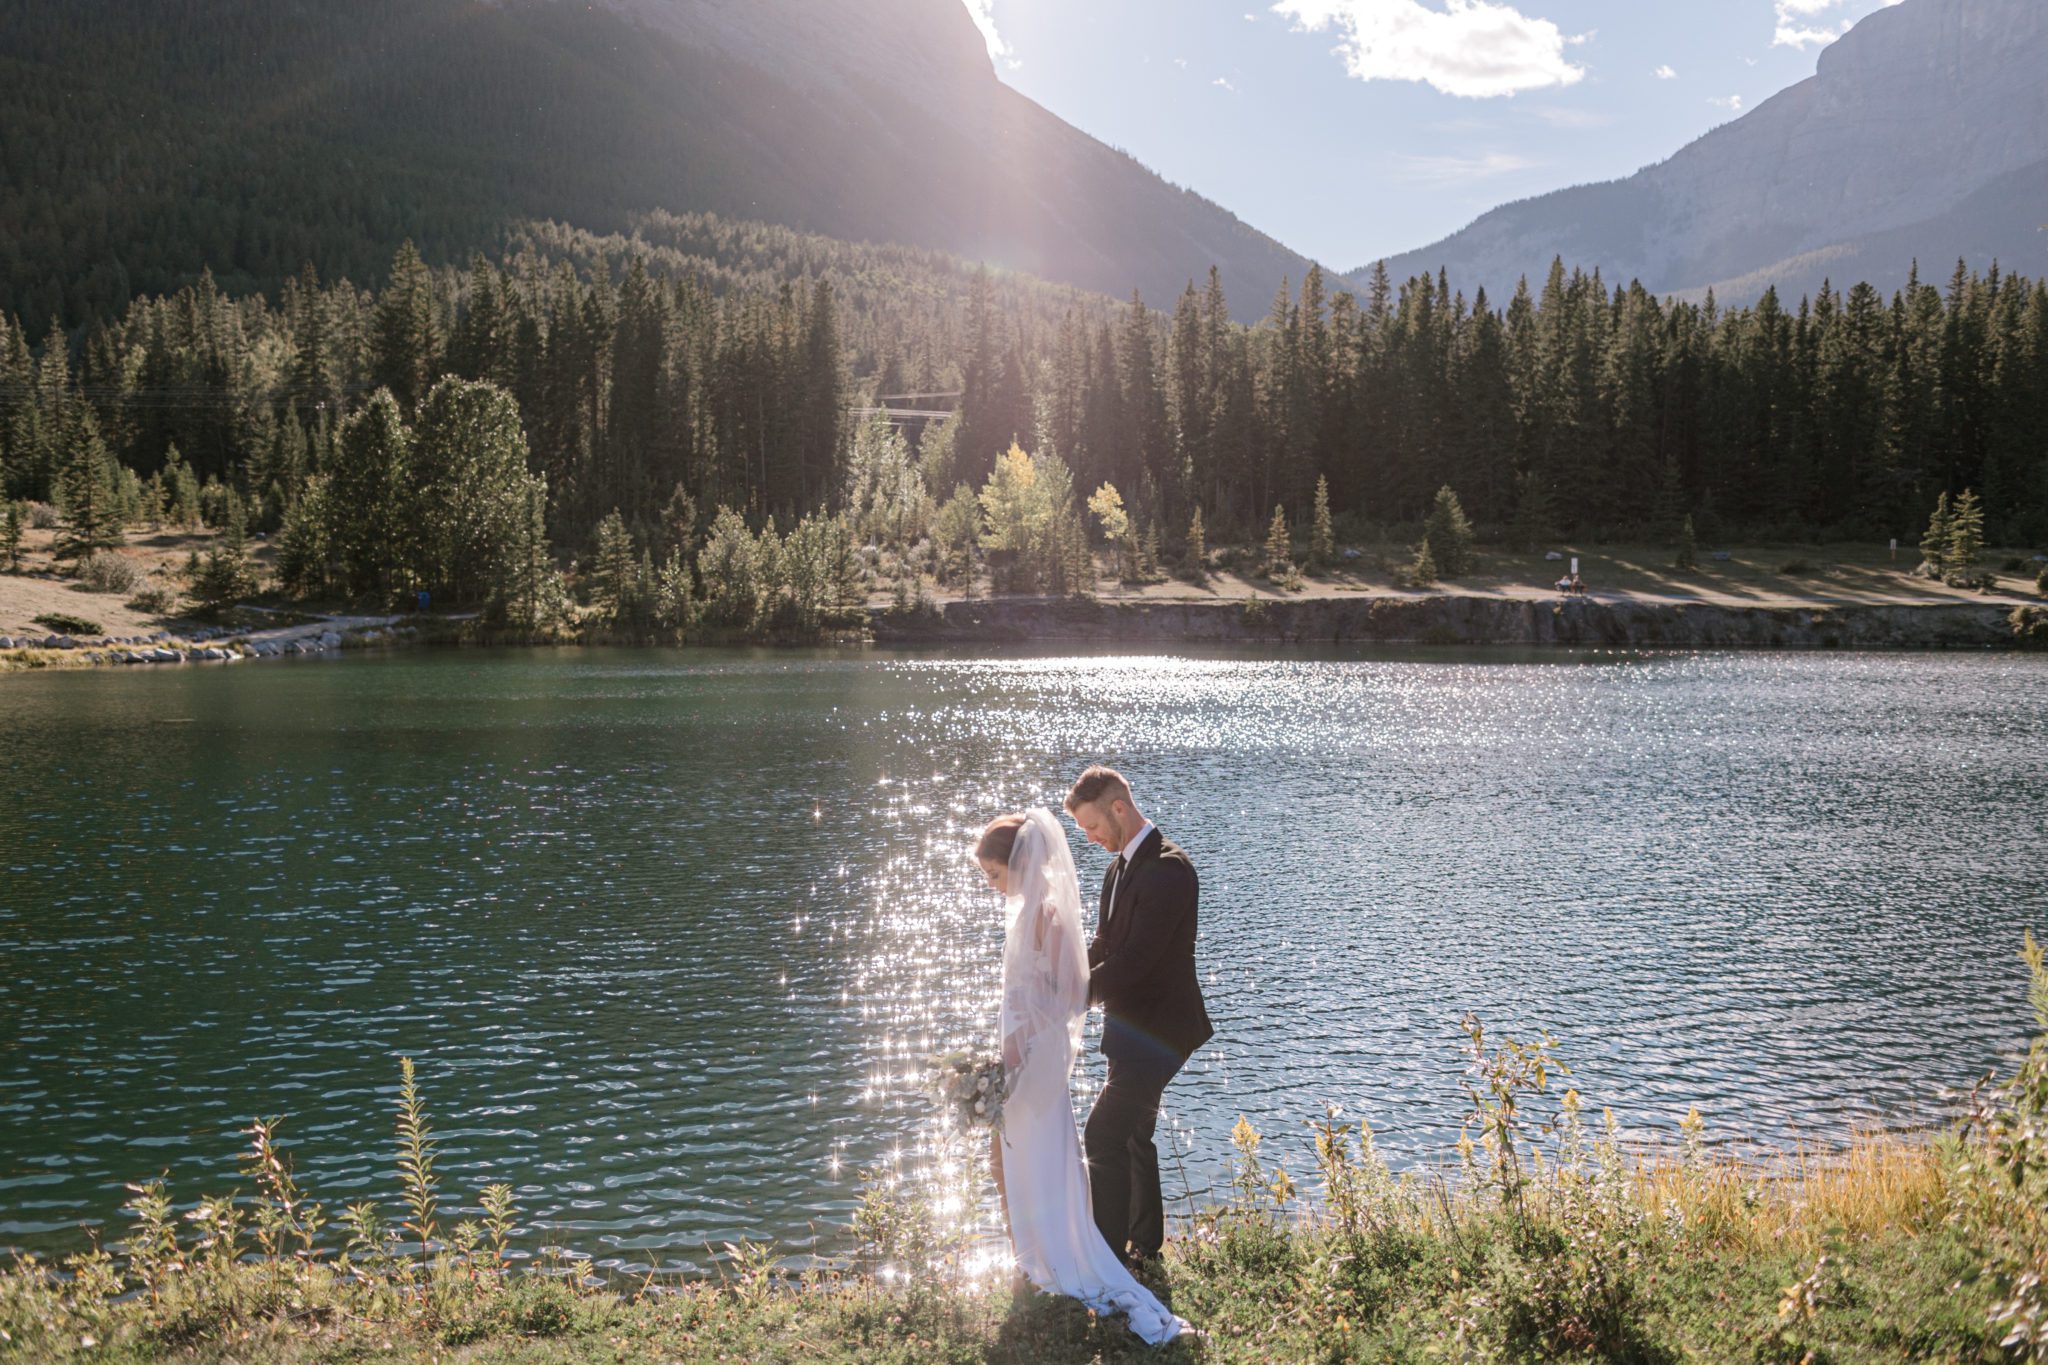 Classic outdoor September wedding in Canmore, Alberta.